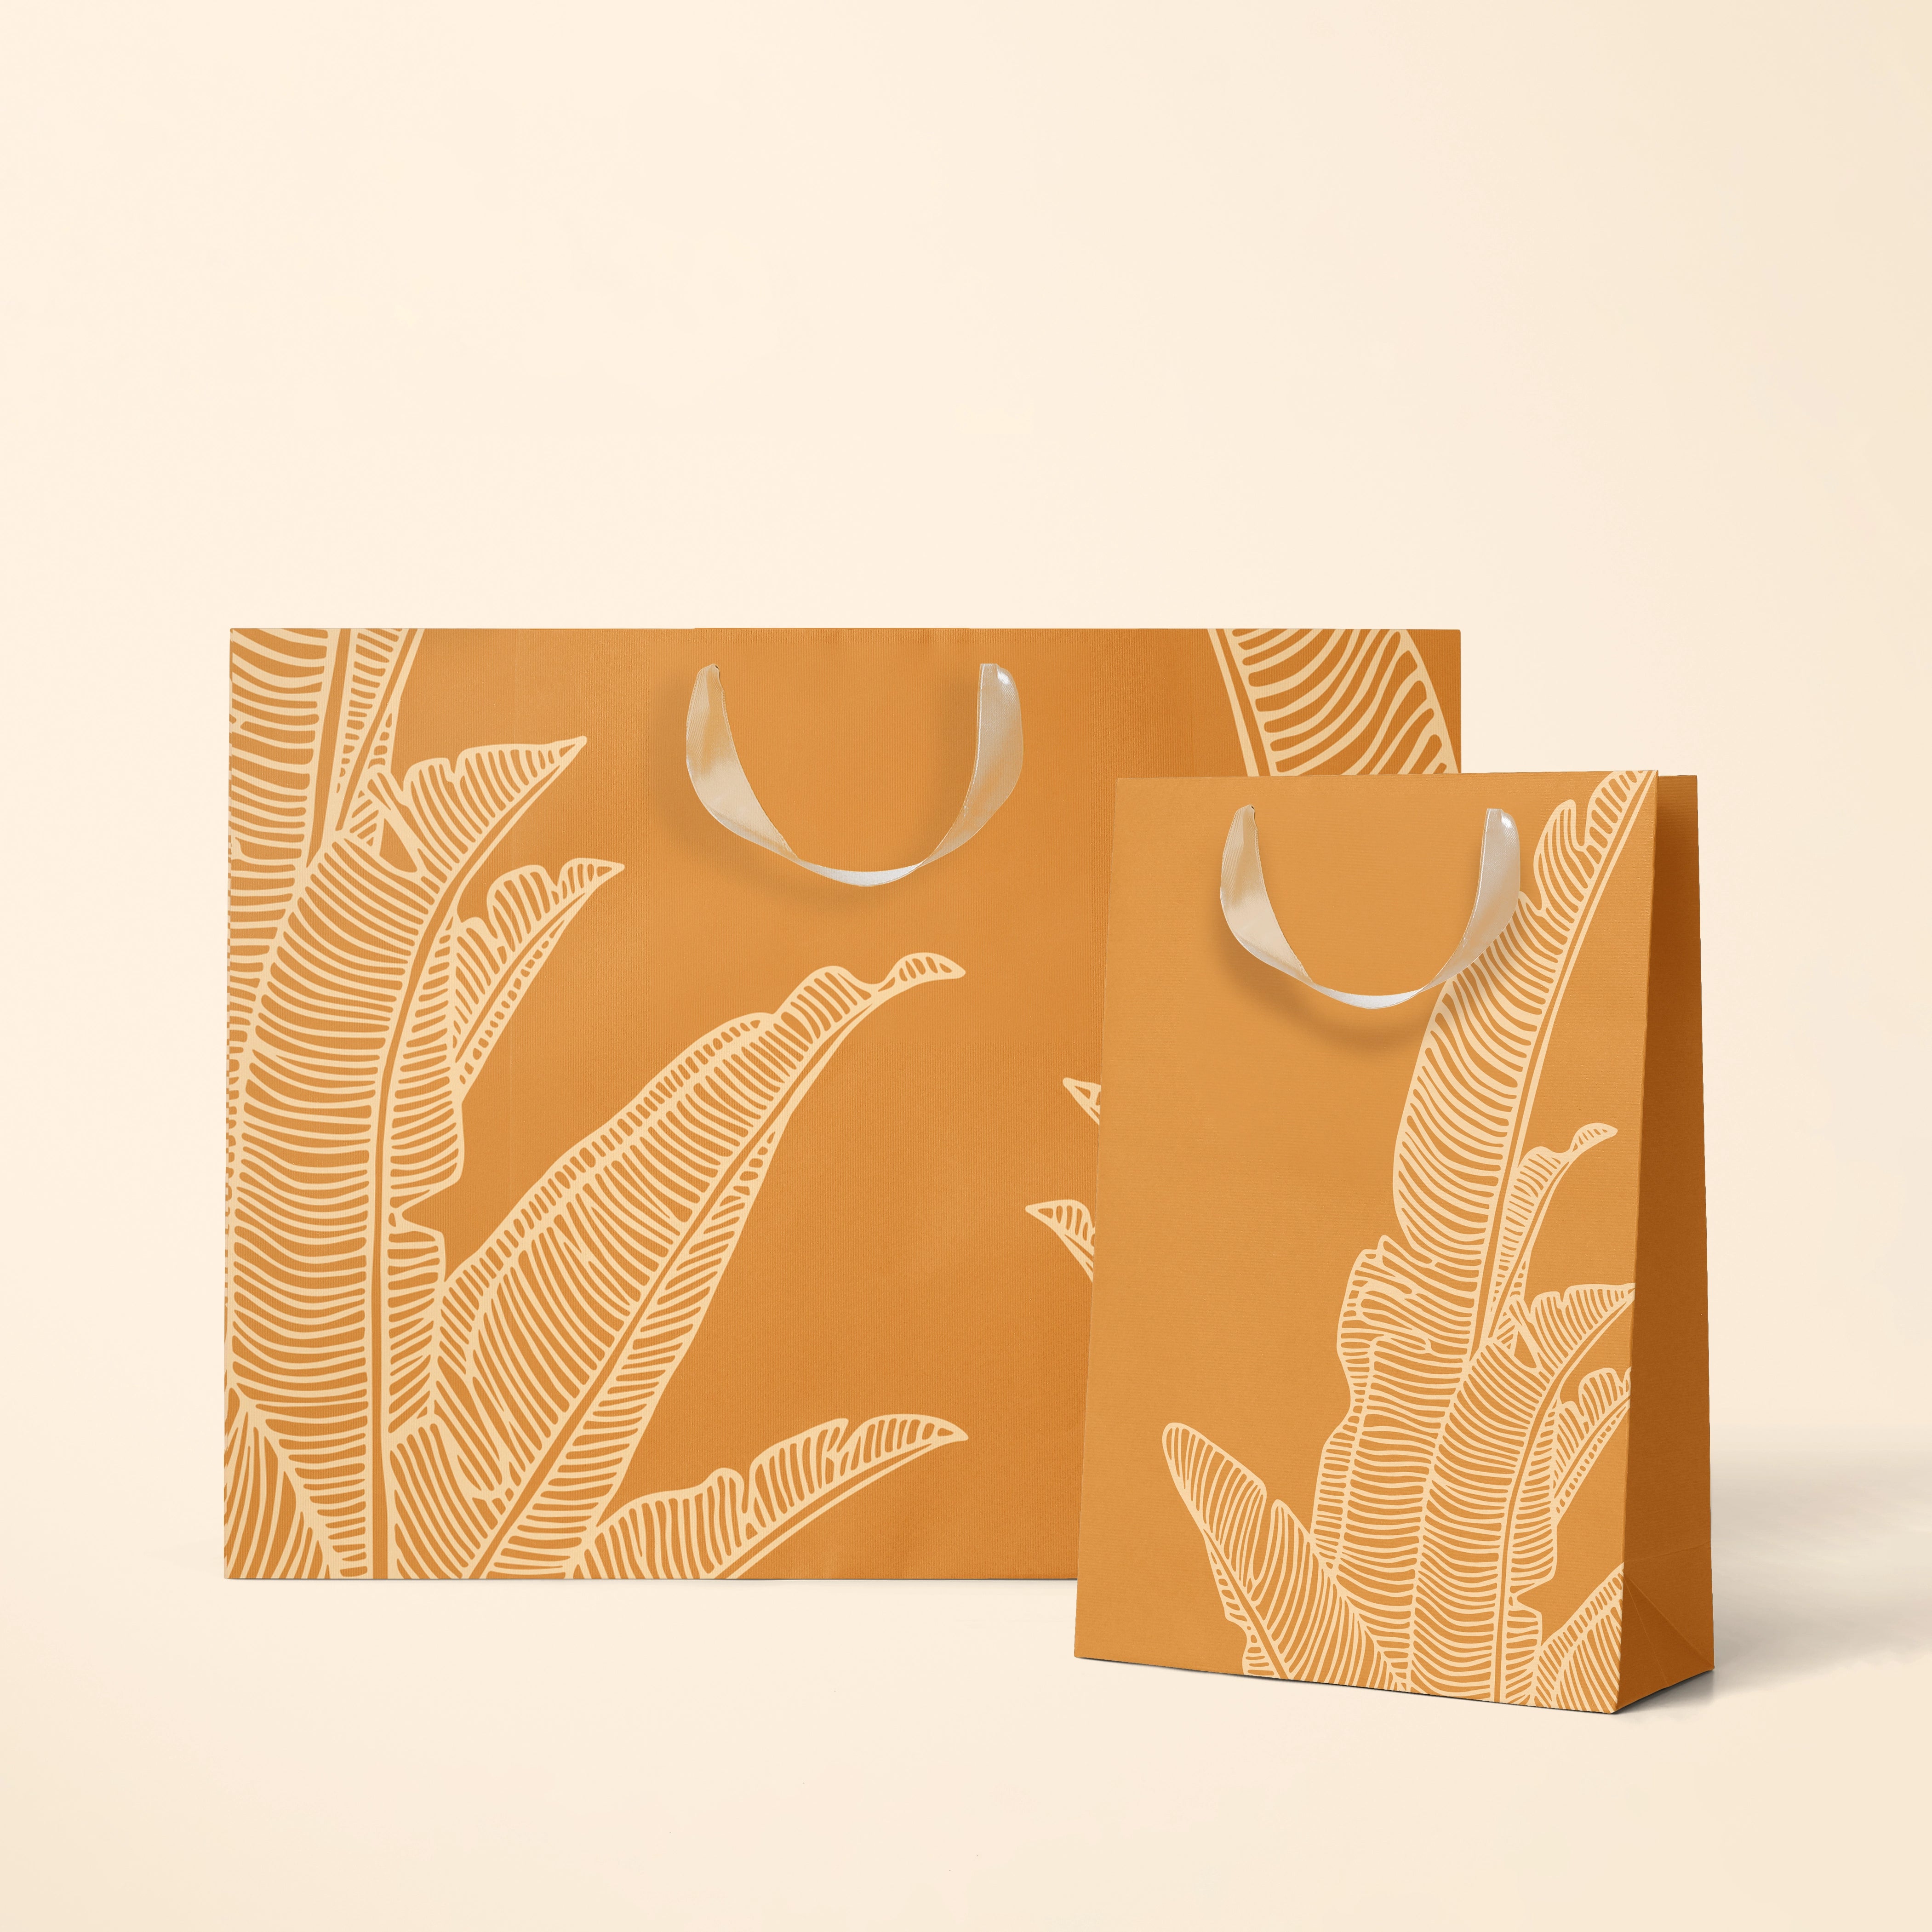 On a cream background is two different sized orange gift bags with a cream bird of paradise line drawing design as well as cream ribbon handles. 